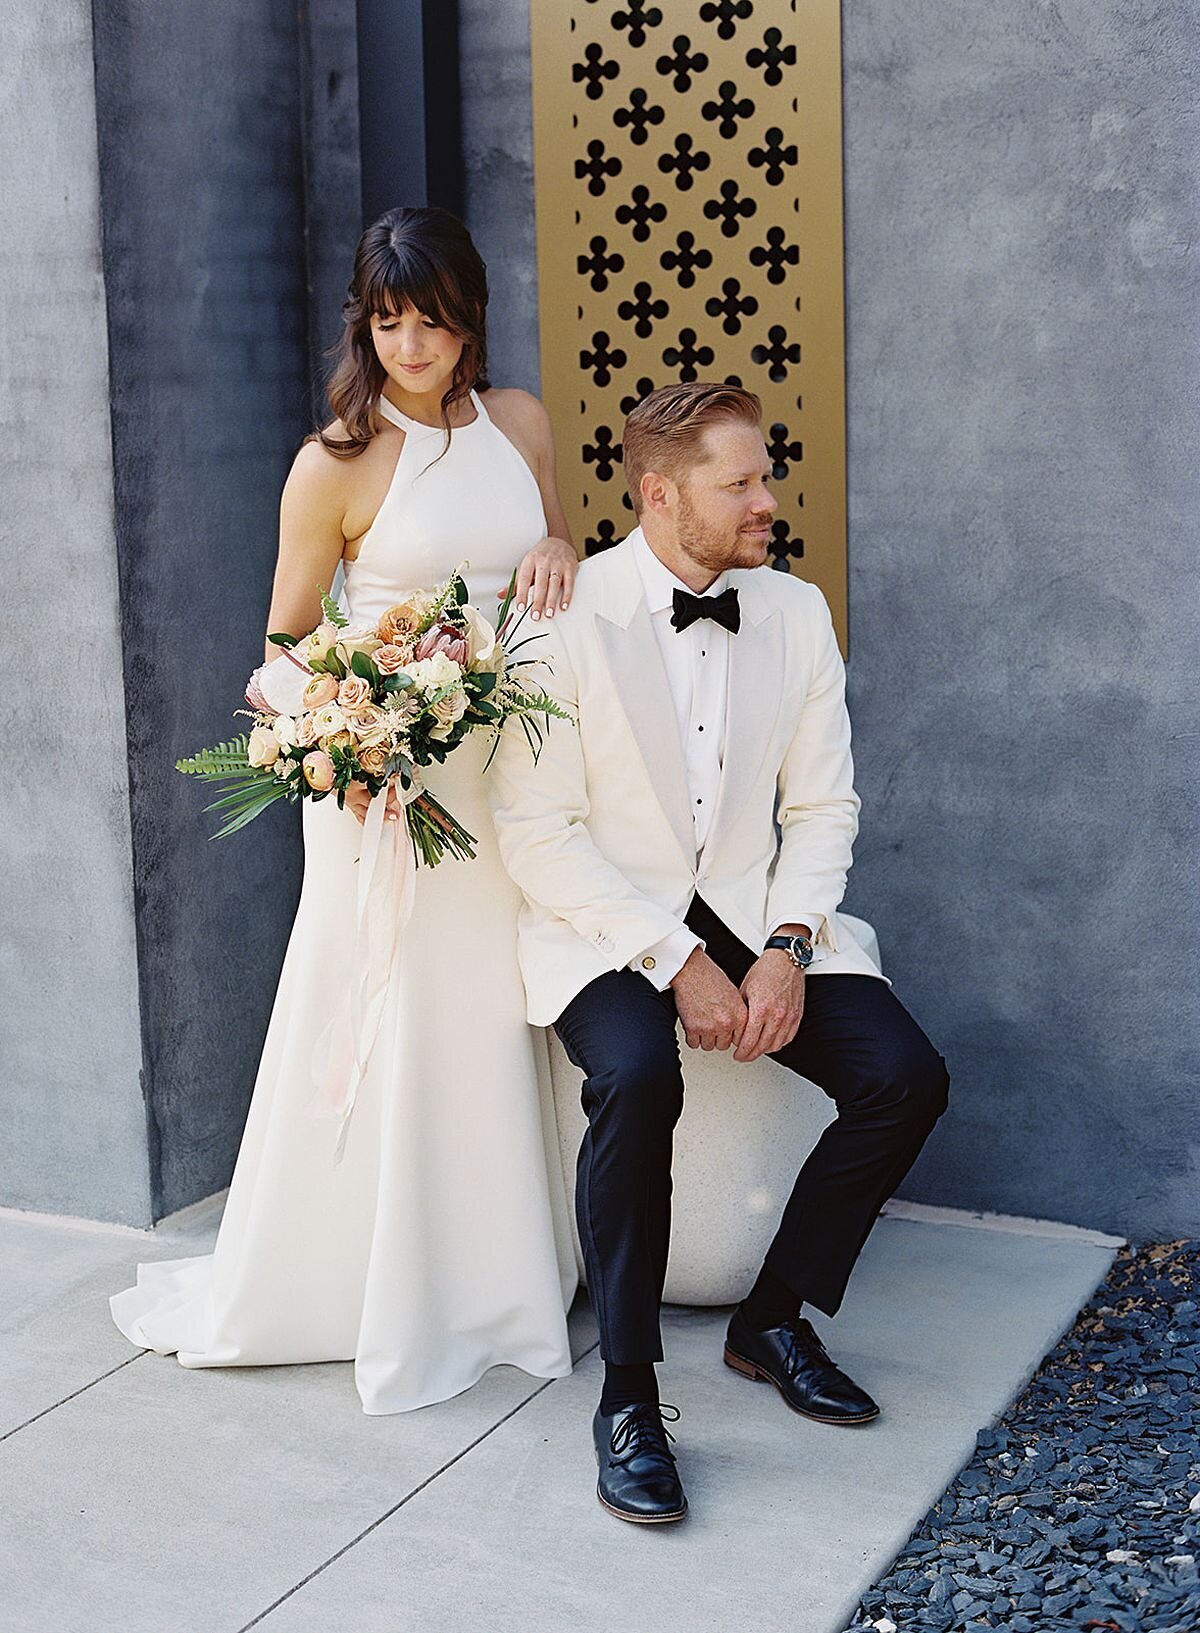 The bride, wearing a silk halter top sheath wedding dress and veil, holding a horizontal cascade bouquet of palm fronds and tropical flowers, as she stands behind the groom holding onto his shoulder in the courtyard of Clementine Hall. The groom, wearing a tuxedo with a white jacket, sits on a white stool in front of a gold filigree accent window against a gray wall.